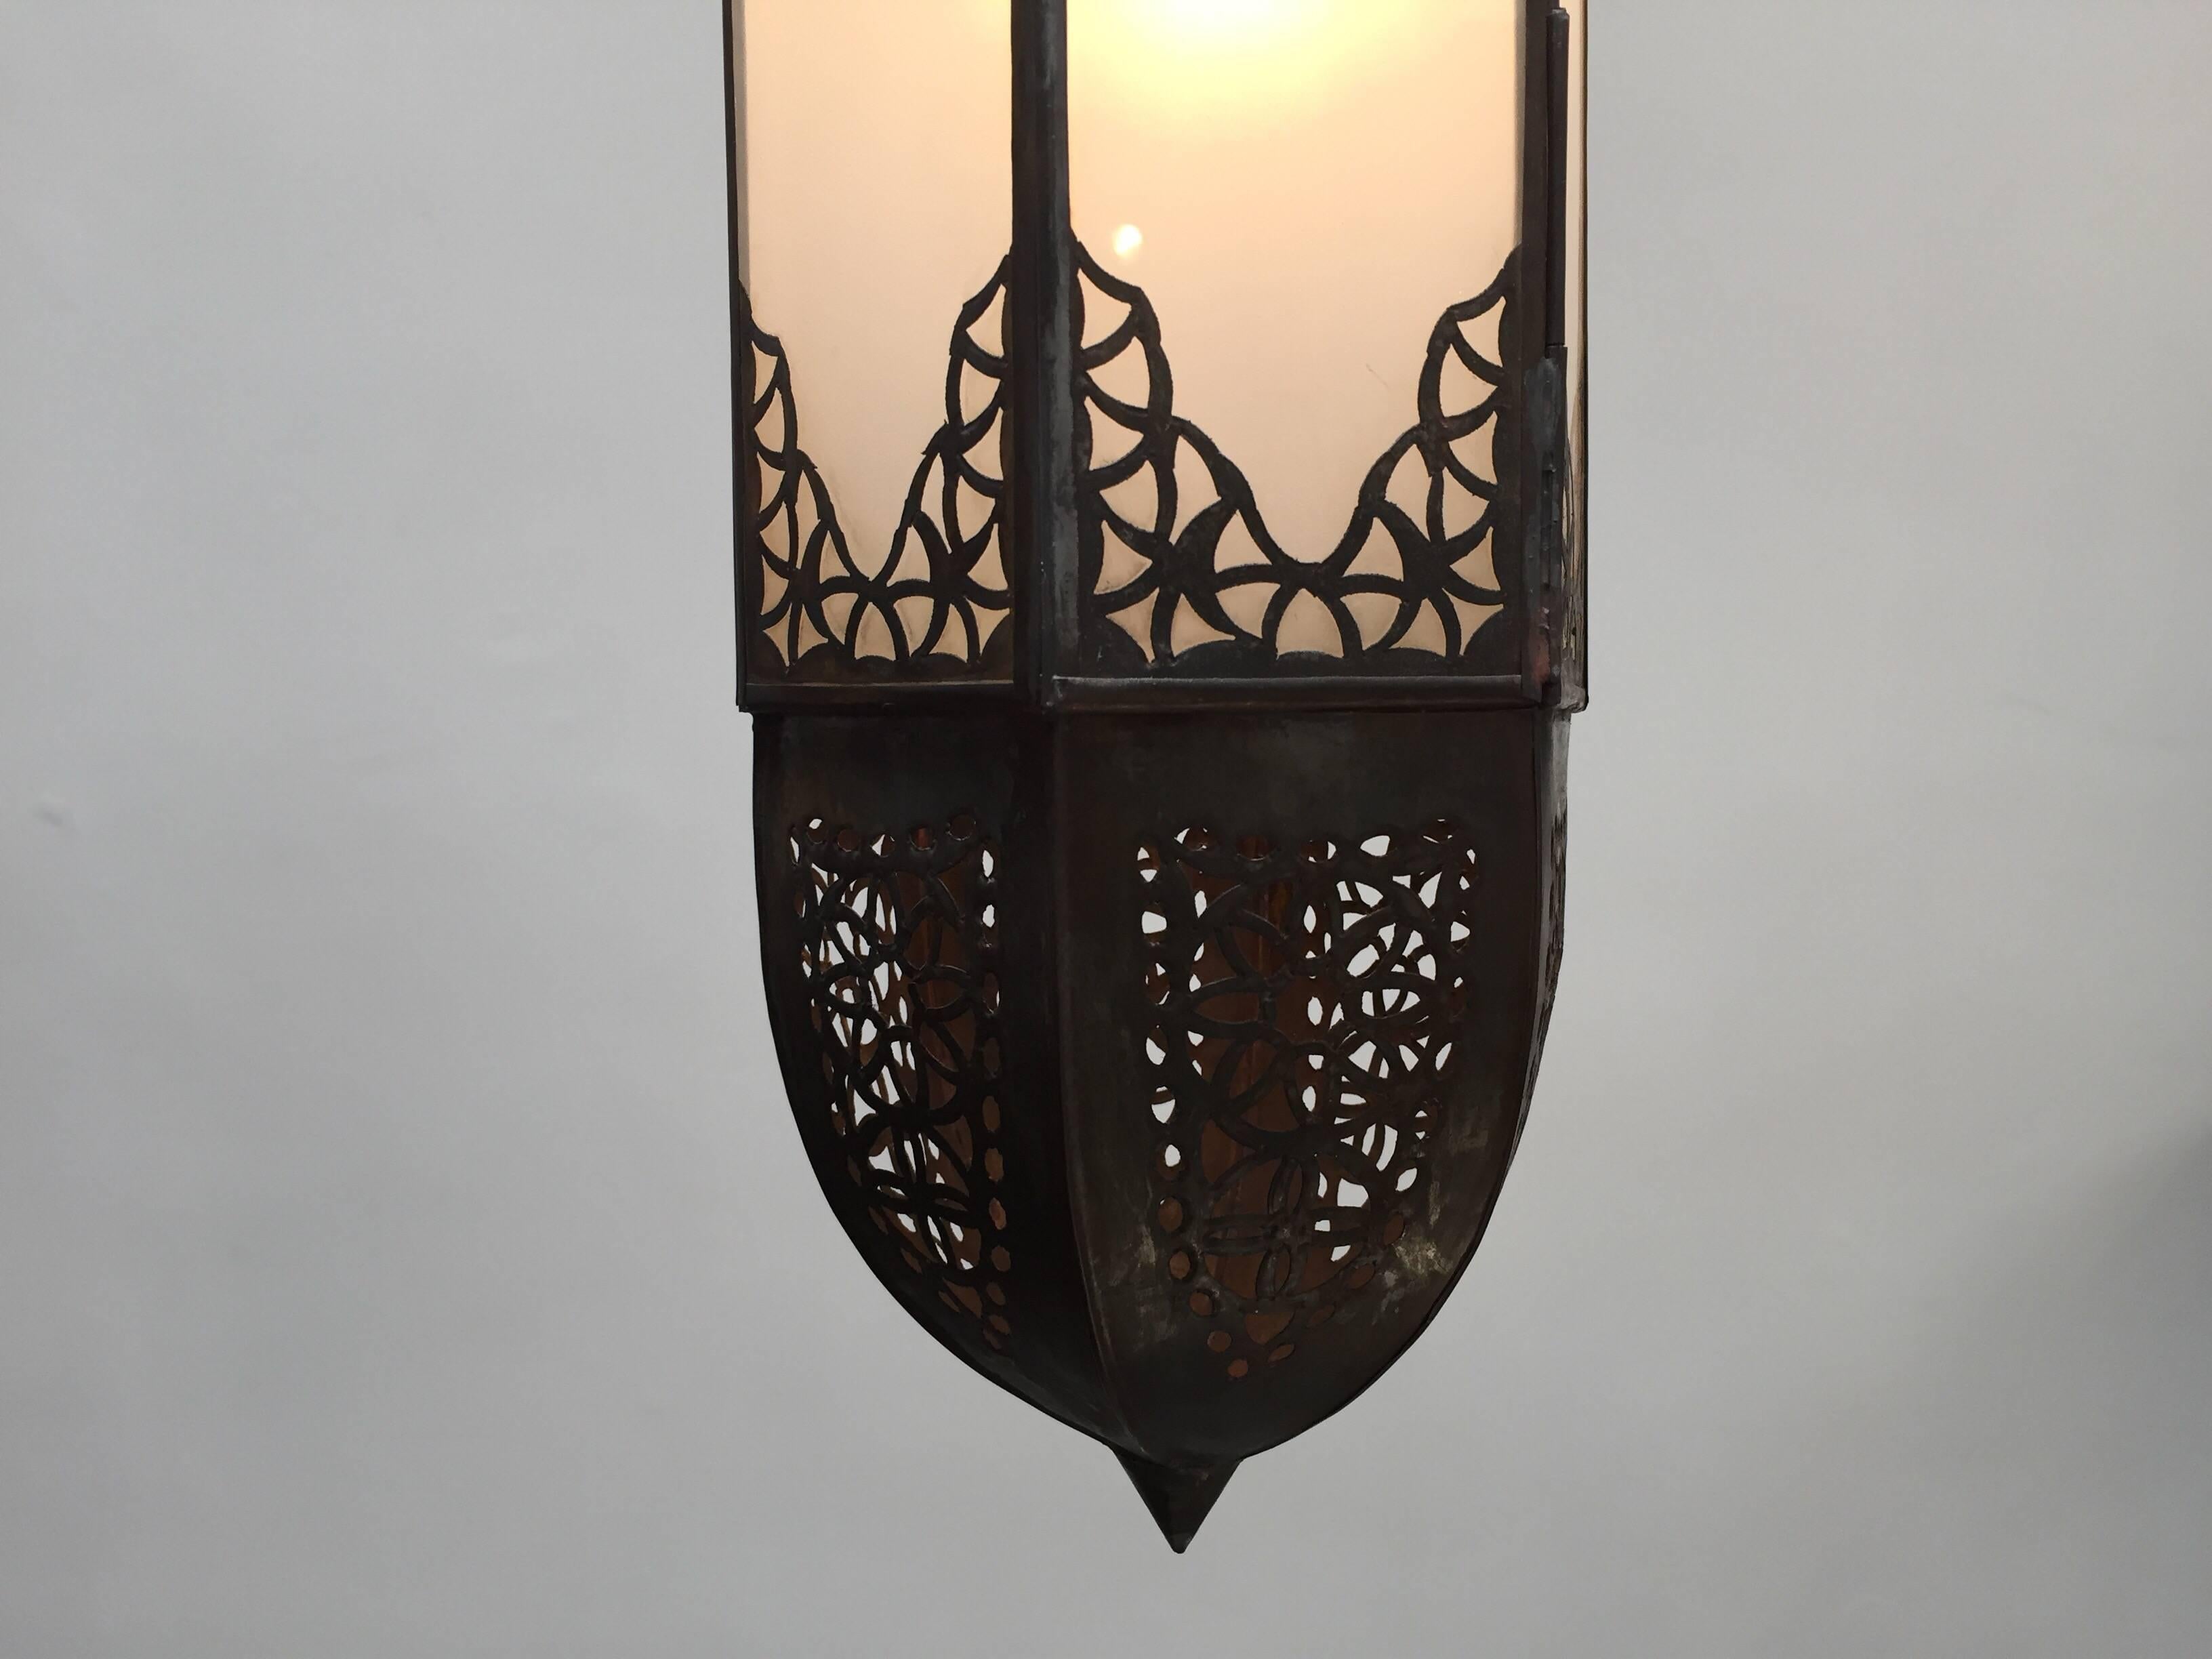 Handcrafted Moroccan Moorish metal and milky glass lantern, rewired ready to hang.
Elegant and stylish milky glass handcrafted Moroccan pendant light with intricate filigree work in the Moorish style.
Could be used as a wall sconces or hanging from